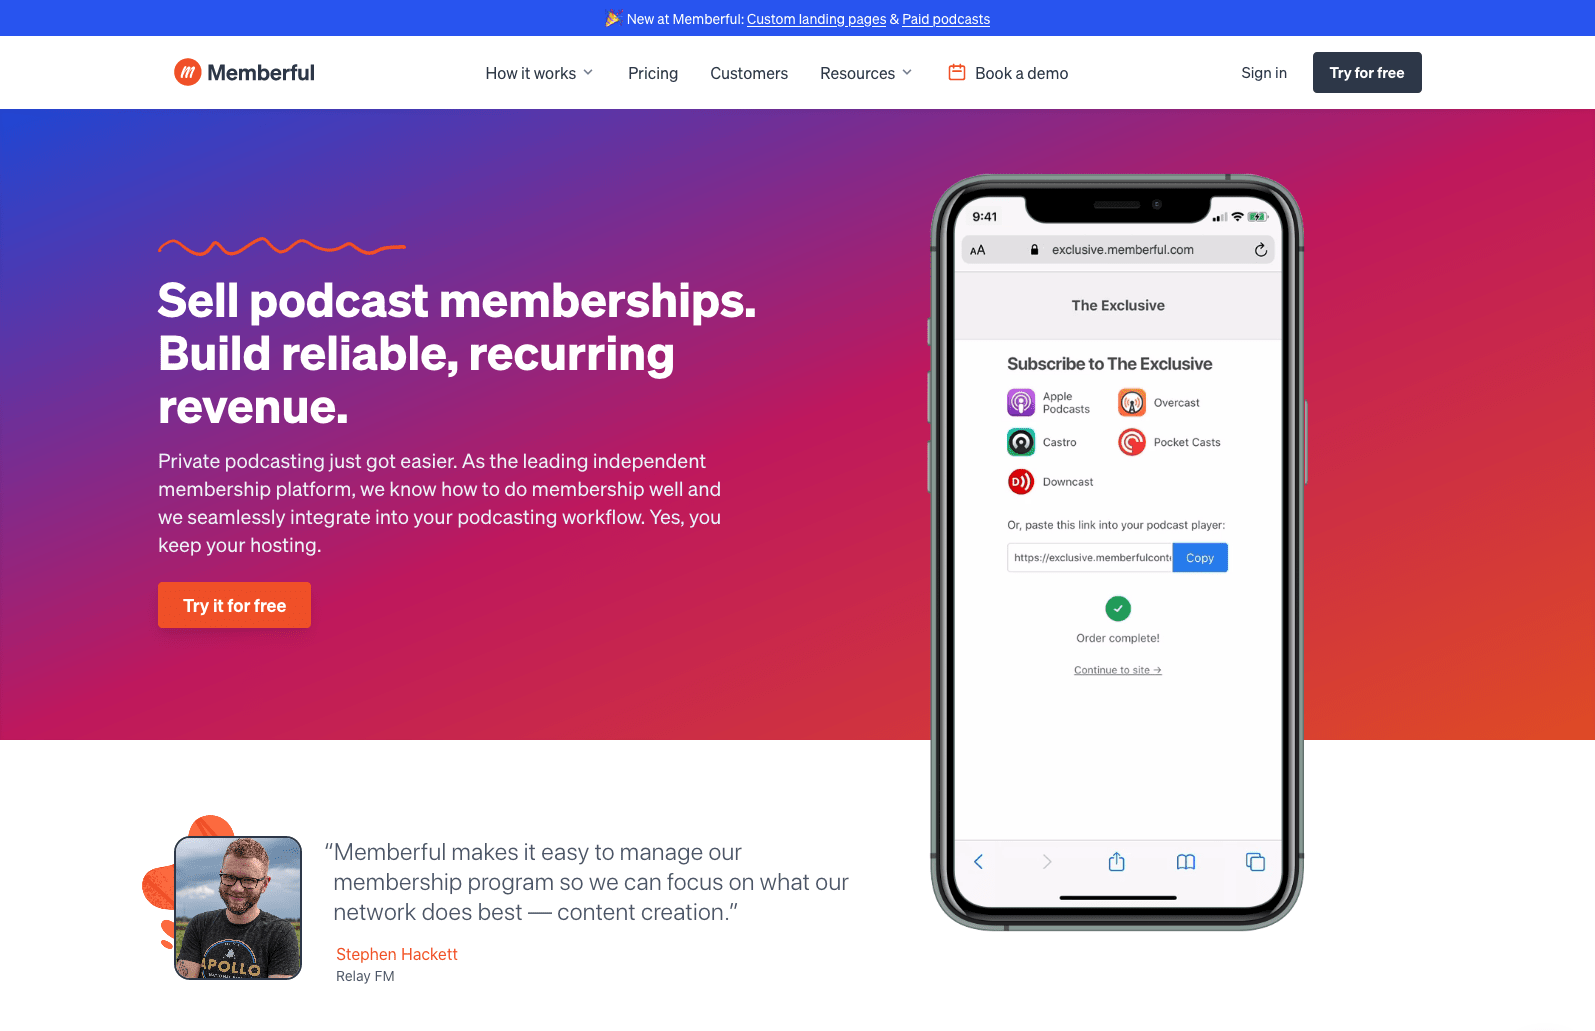 Memberful 'Podcasts' page screenshot 2021